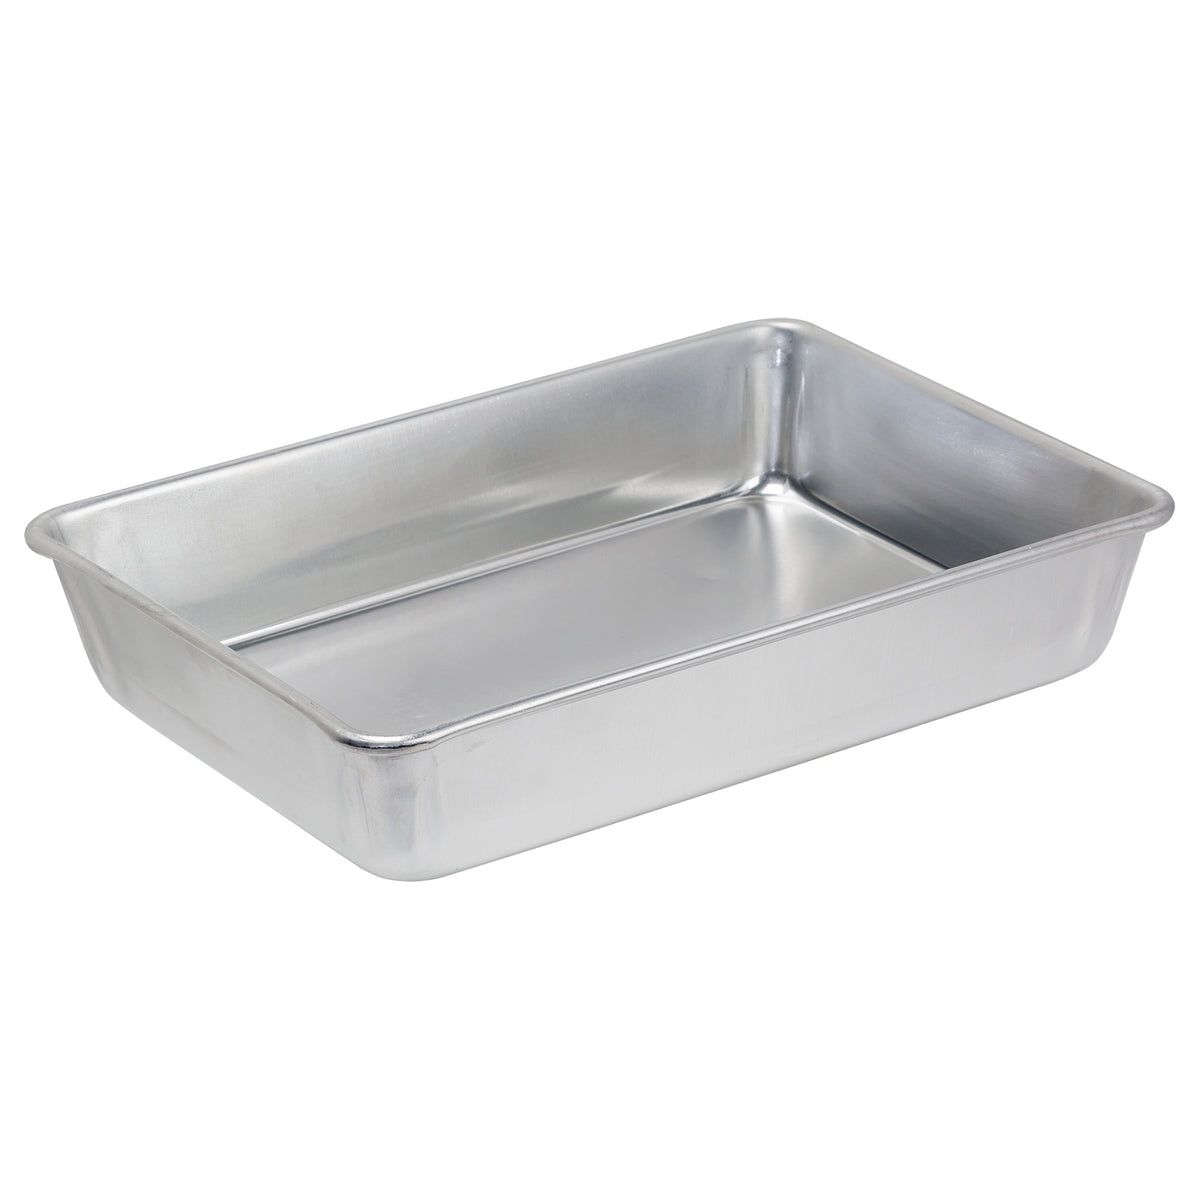 Toaster Oven Loaf Pan, Aluminum 8 x 4.2 x 2 Inch — Kitchen Supply Wholesale